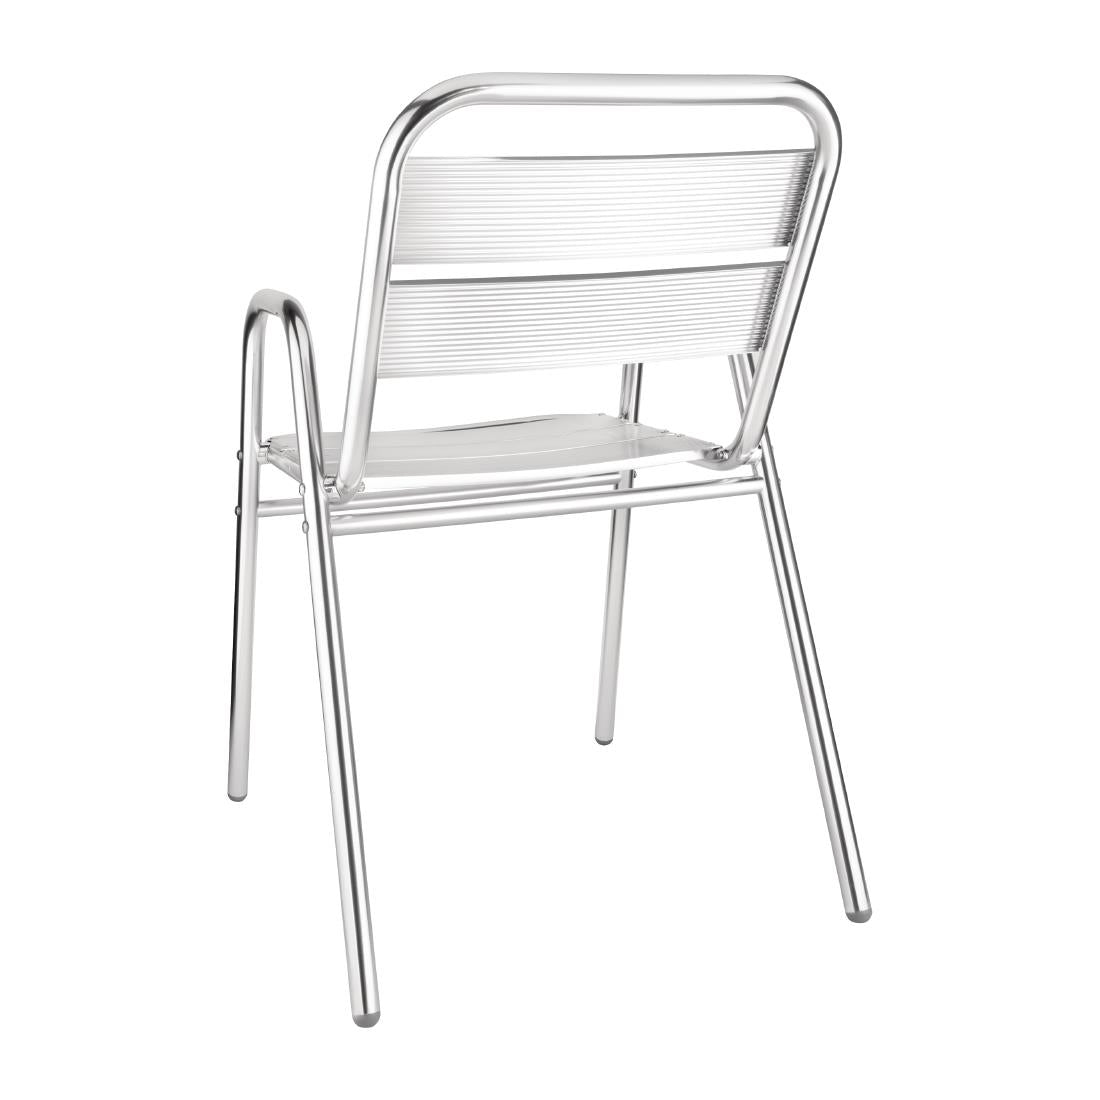 Bolero Aluminium Stacking Chairs Arched Arms (Pack of 4) JD Catering Equipment Solutions Ltd